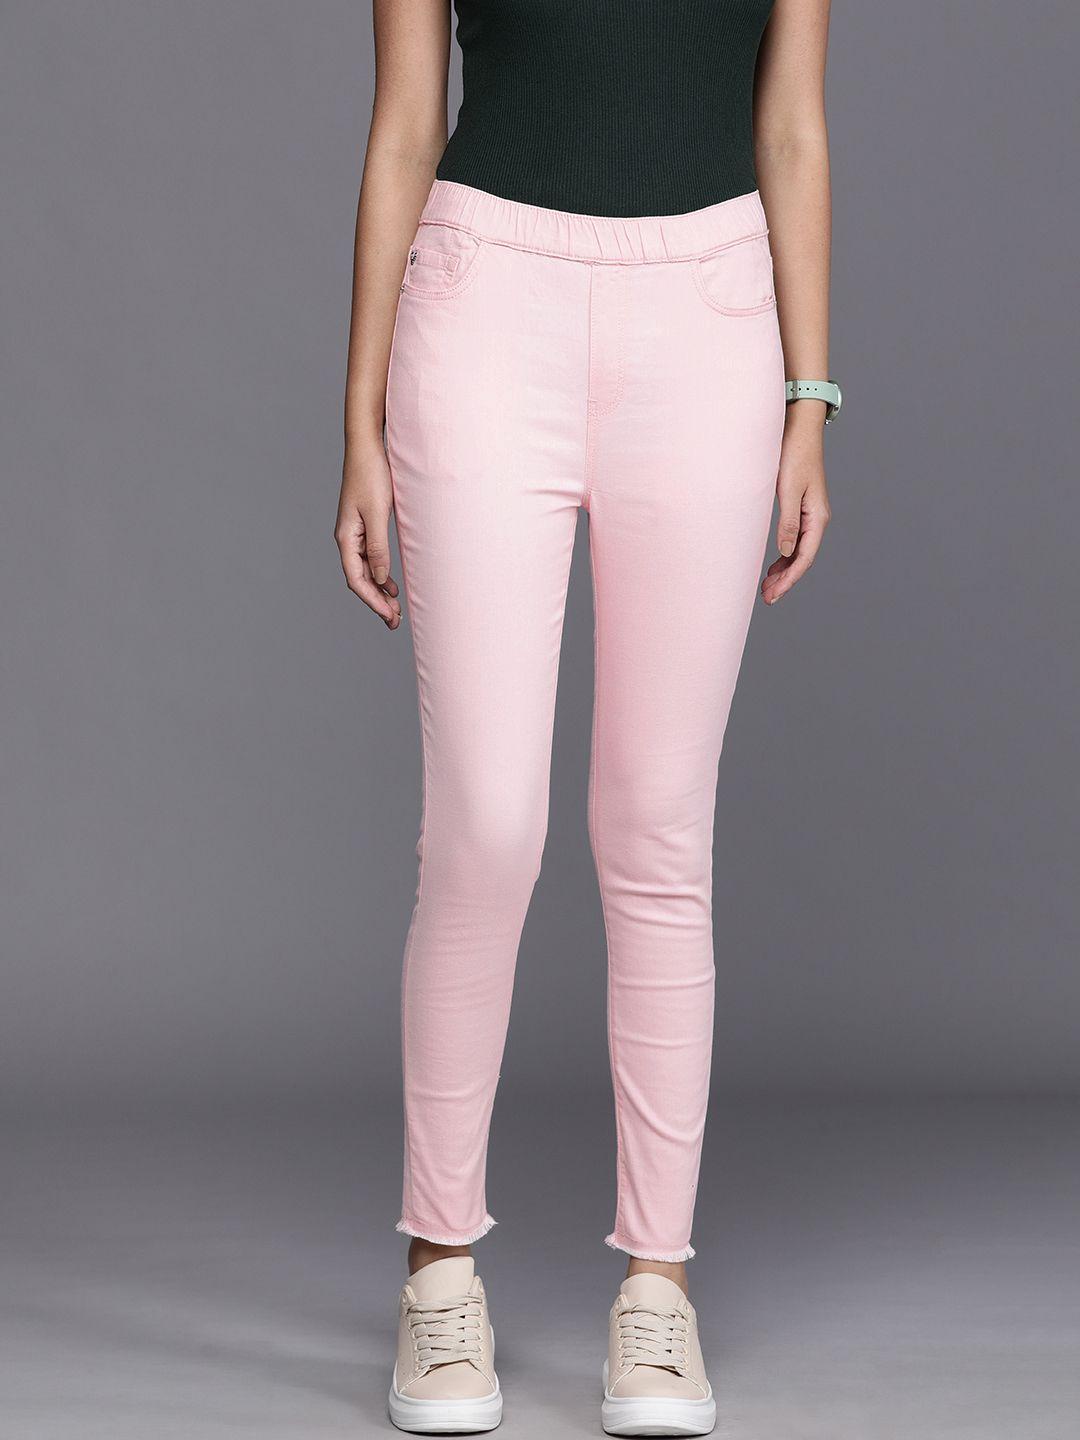 allen solly woman pink skinny fit high-rise frayed jeggings